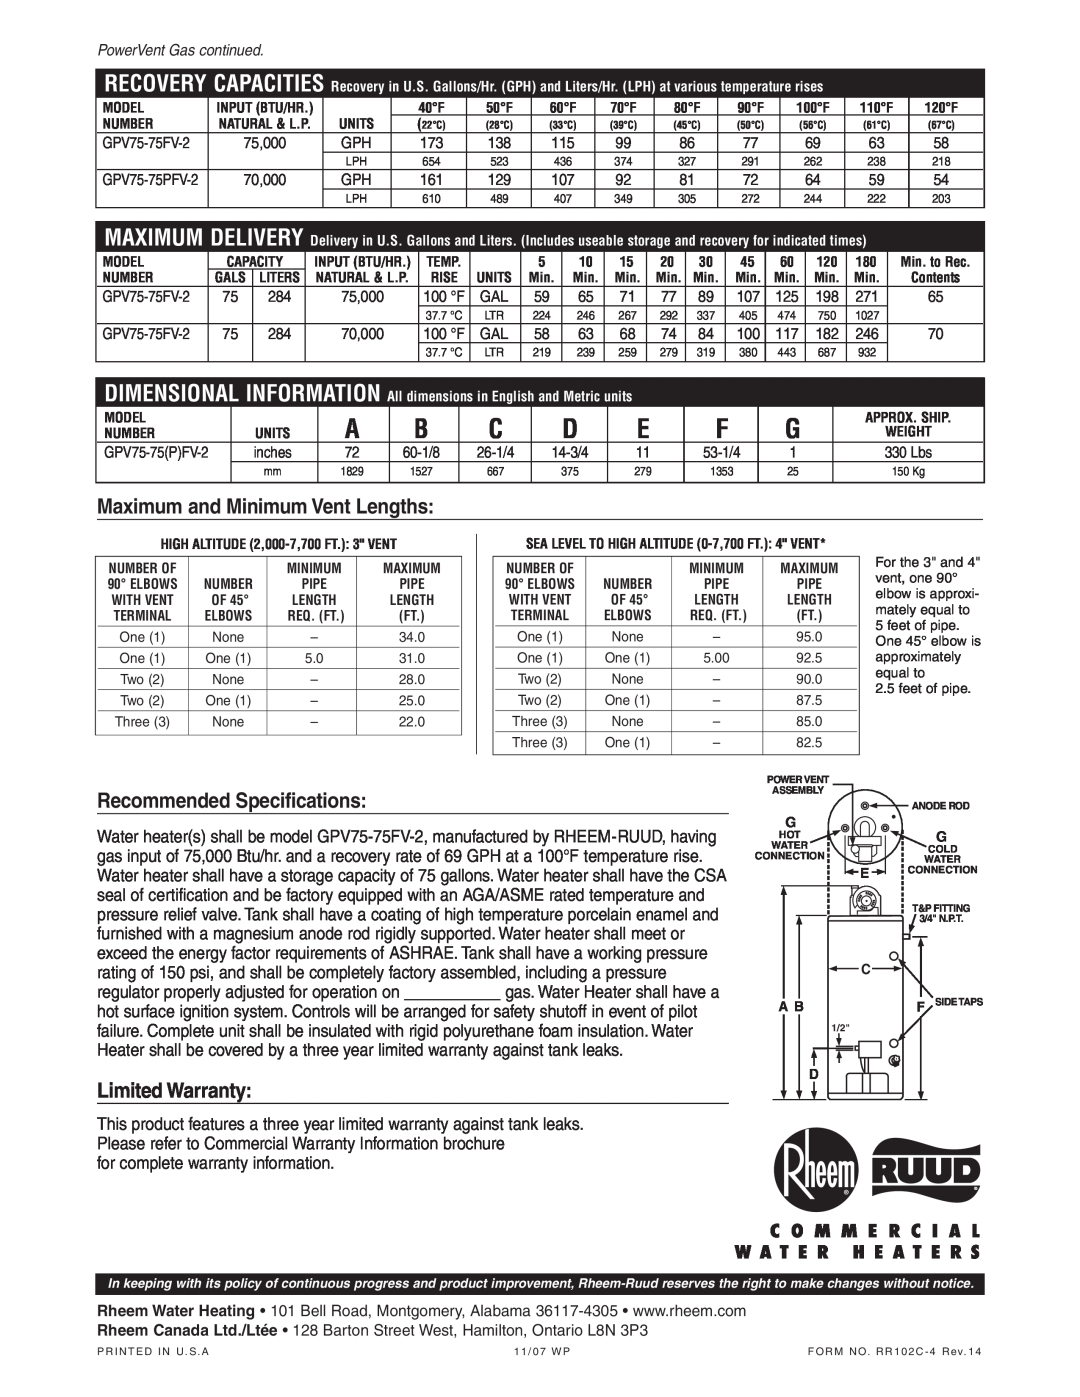 Rheem Commercial Gas Water Heater manual Maximum and Minimum Vent Lengths, Recommended Specifications, Limited Warranty 